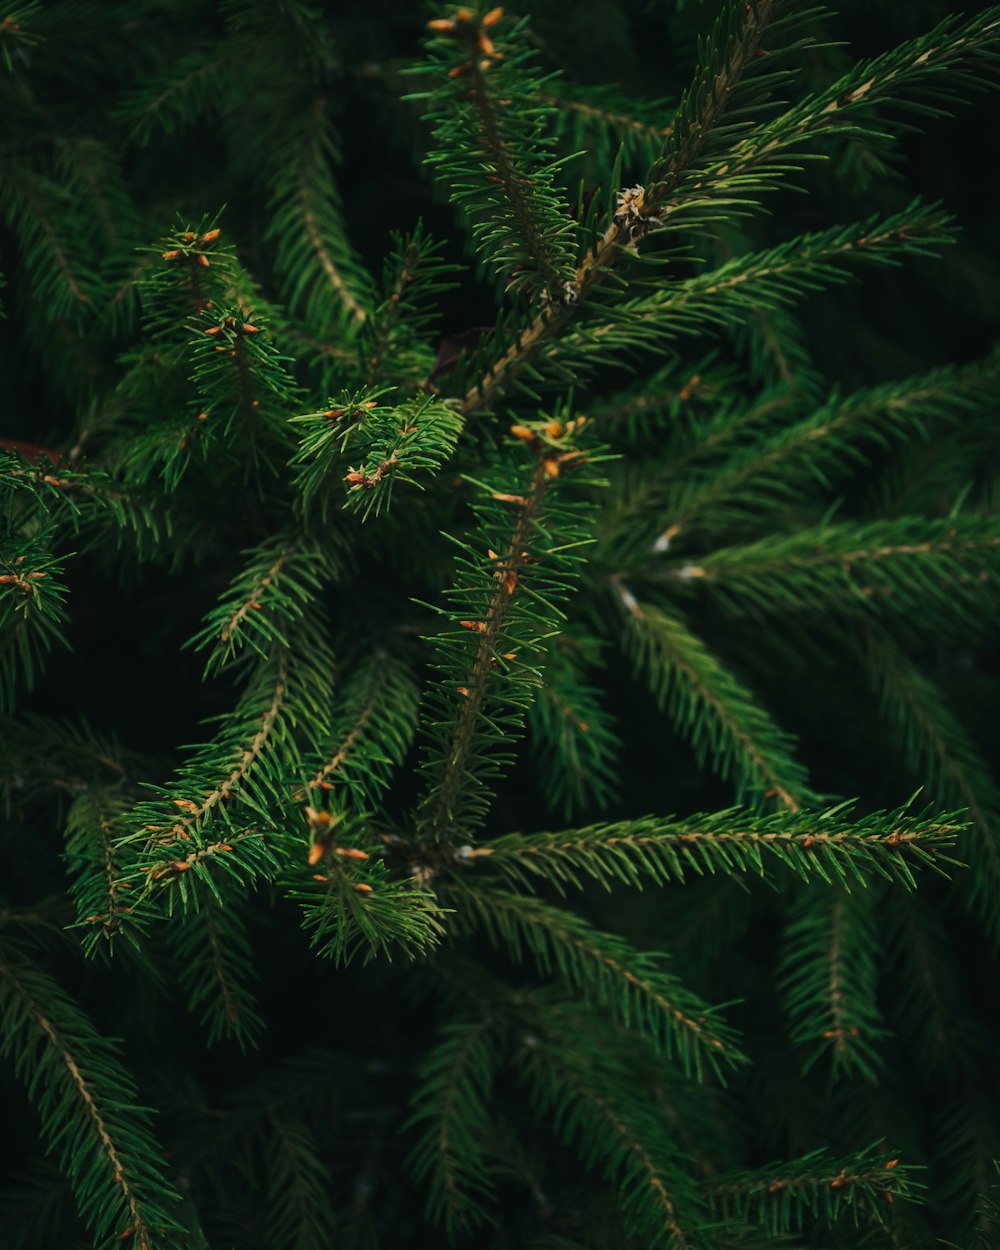 a close-up of some pine trees